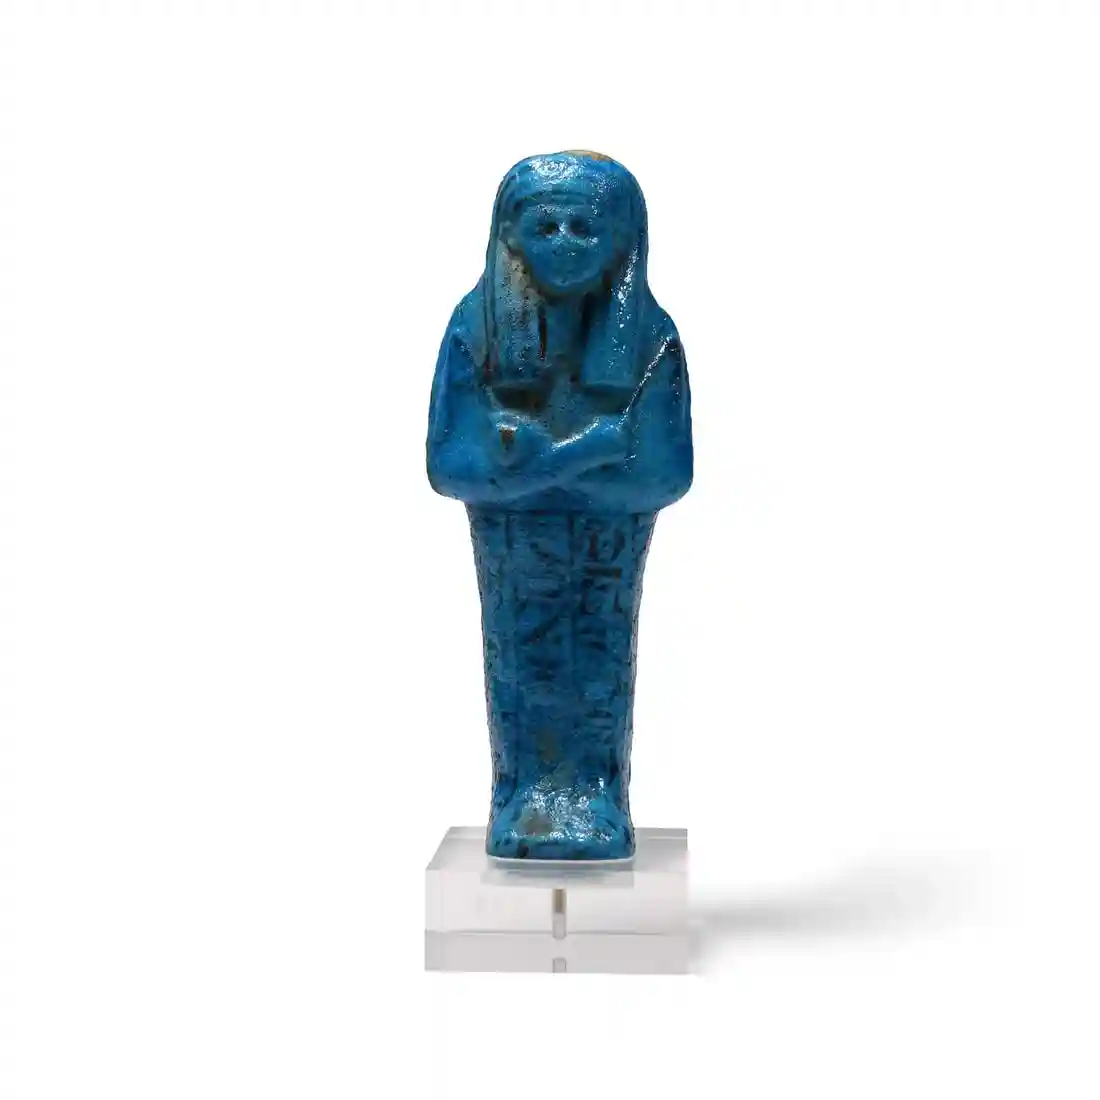 Ancient Egyptian shabti leads five-day antiquities sale at Timeline Dec. 5-9